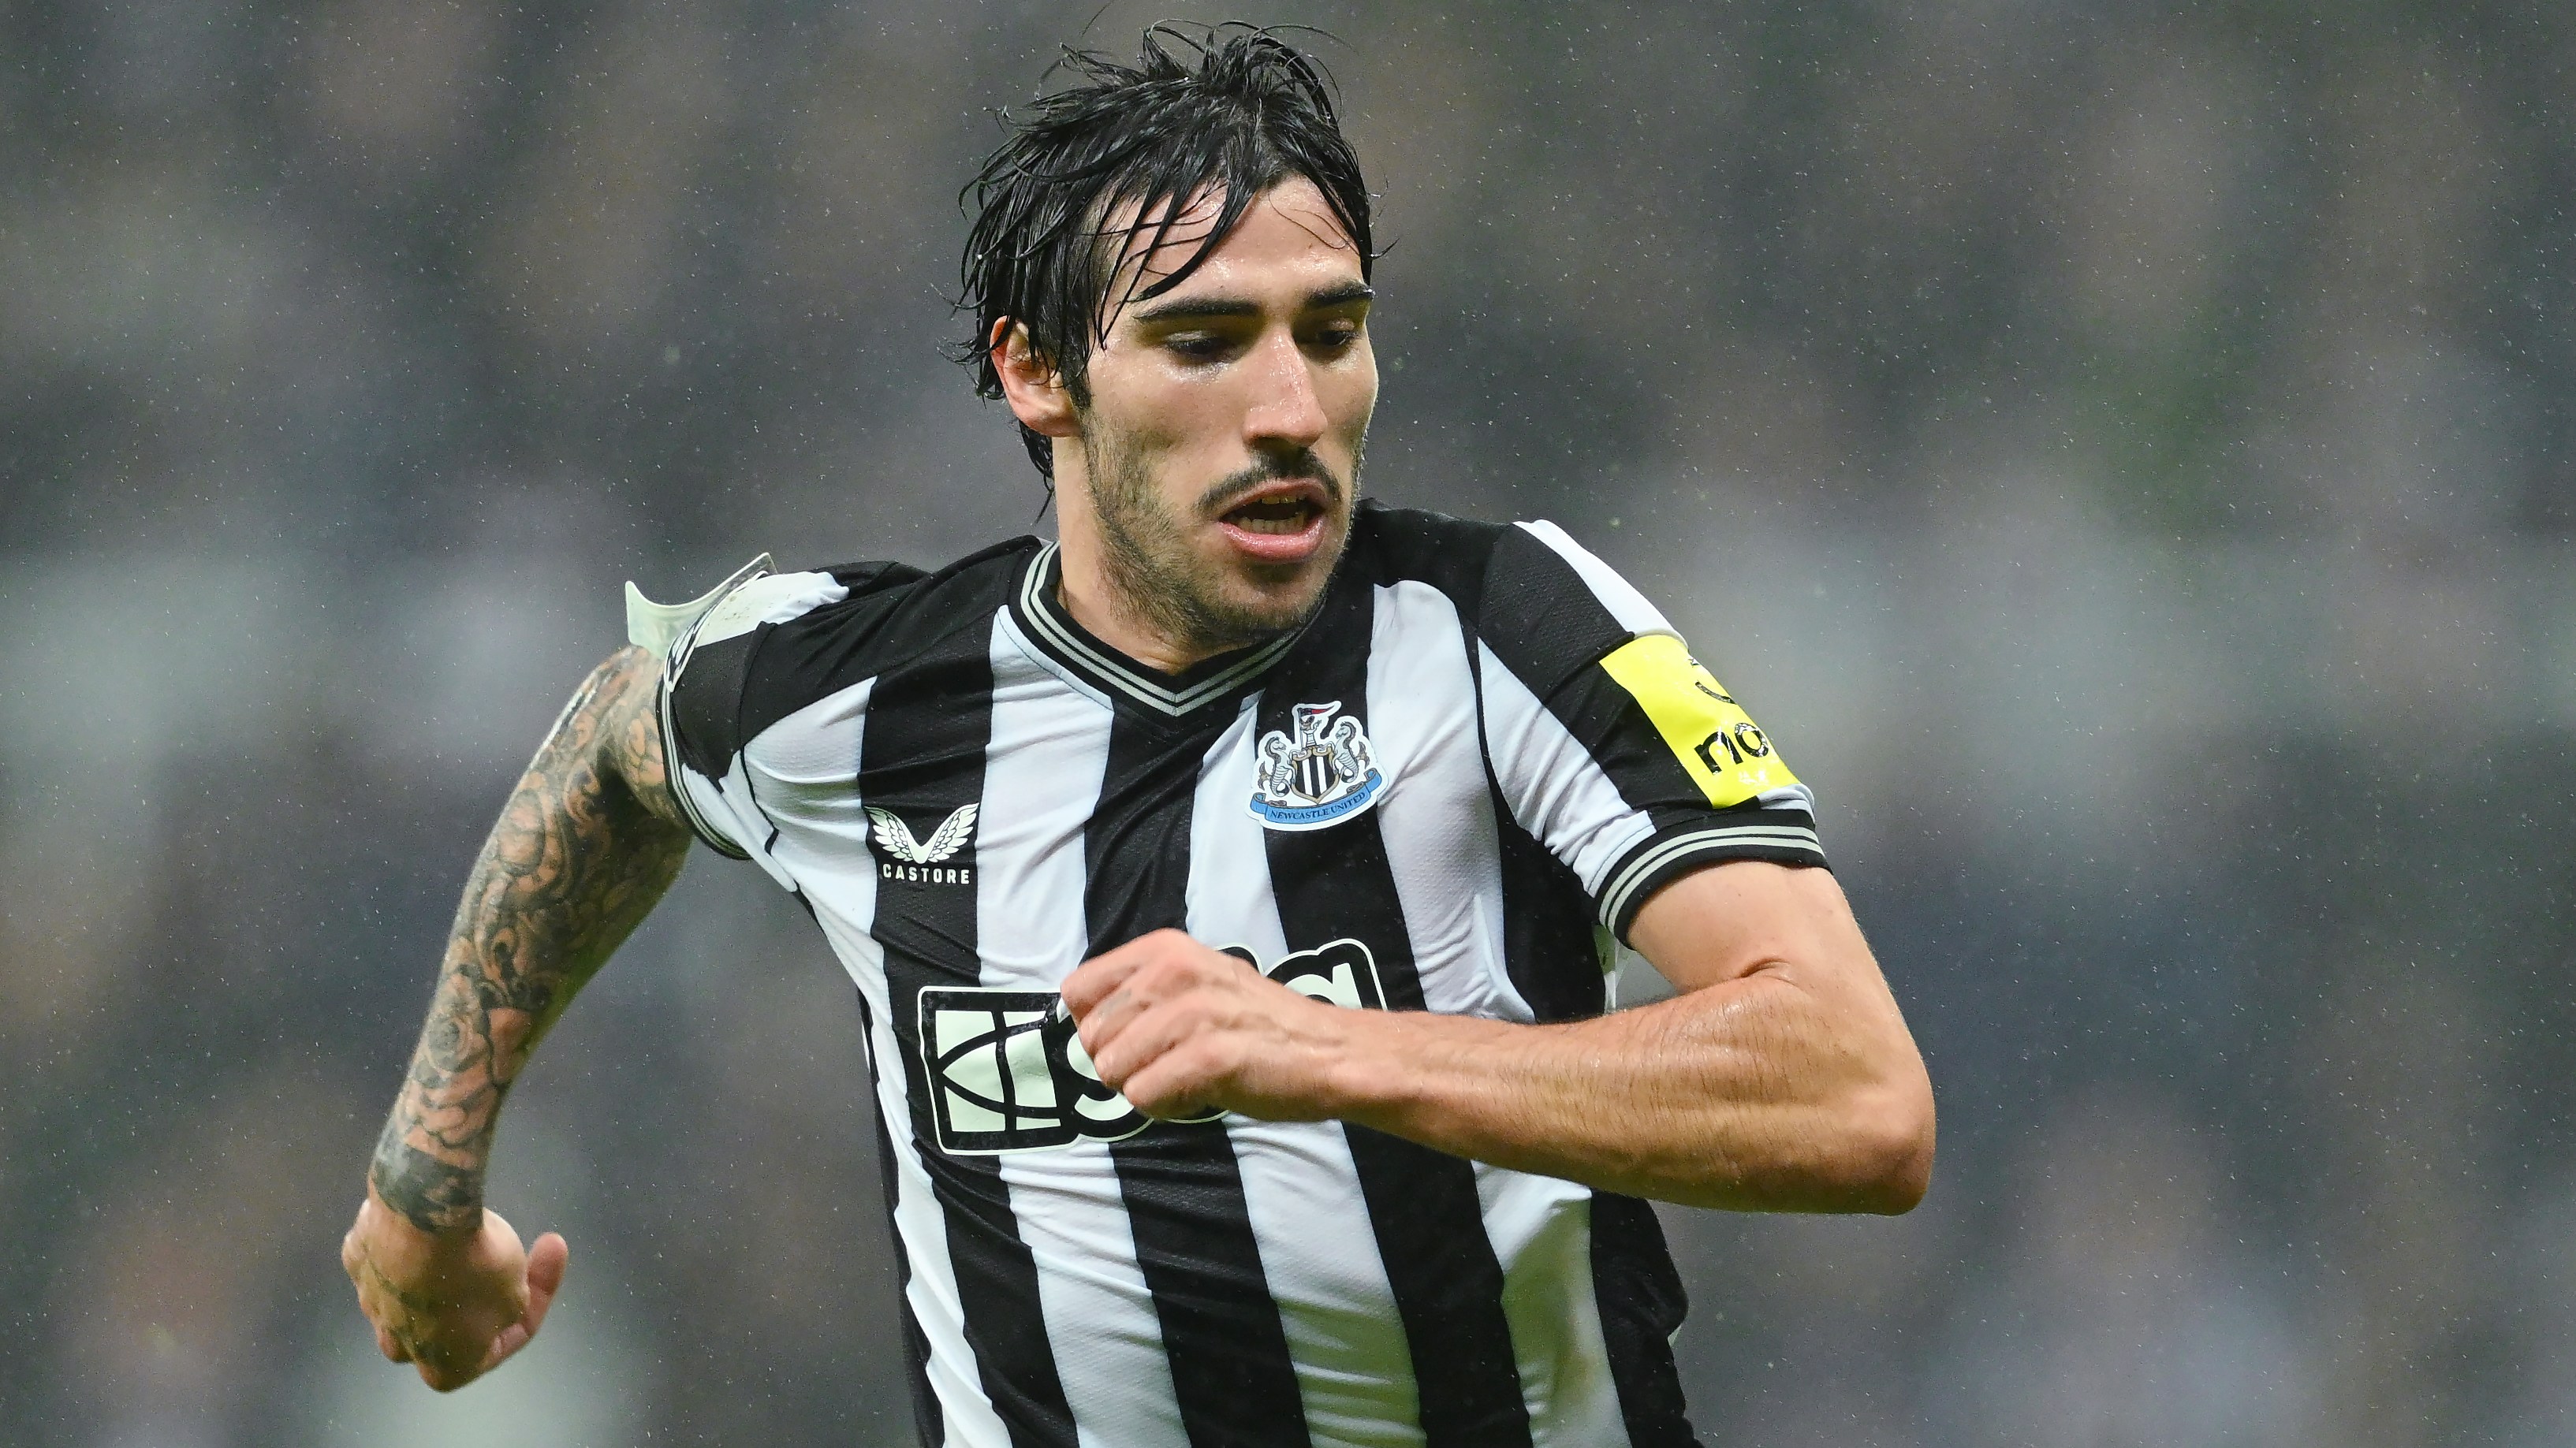 Tonali has played only 14 matches for Newcastle since arriving from AC Milan for £52 million